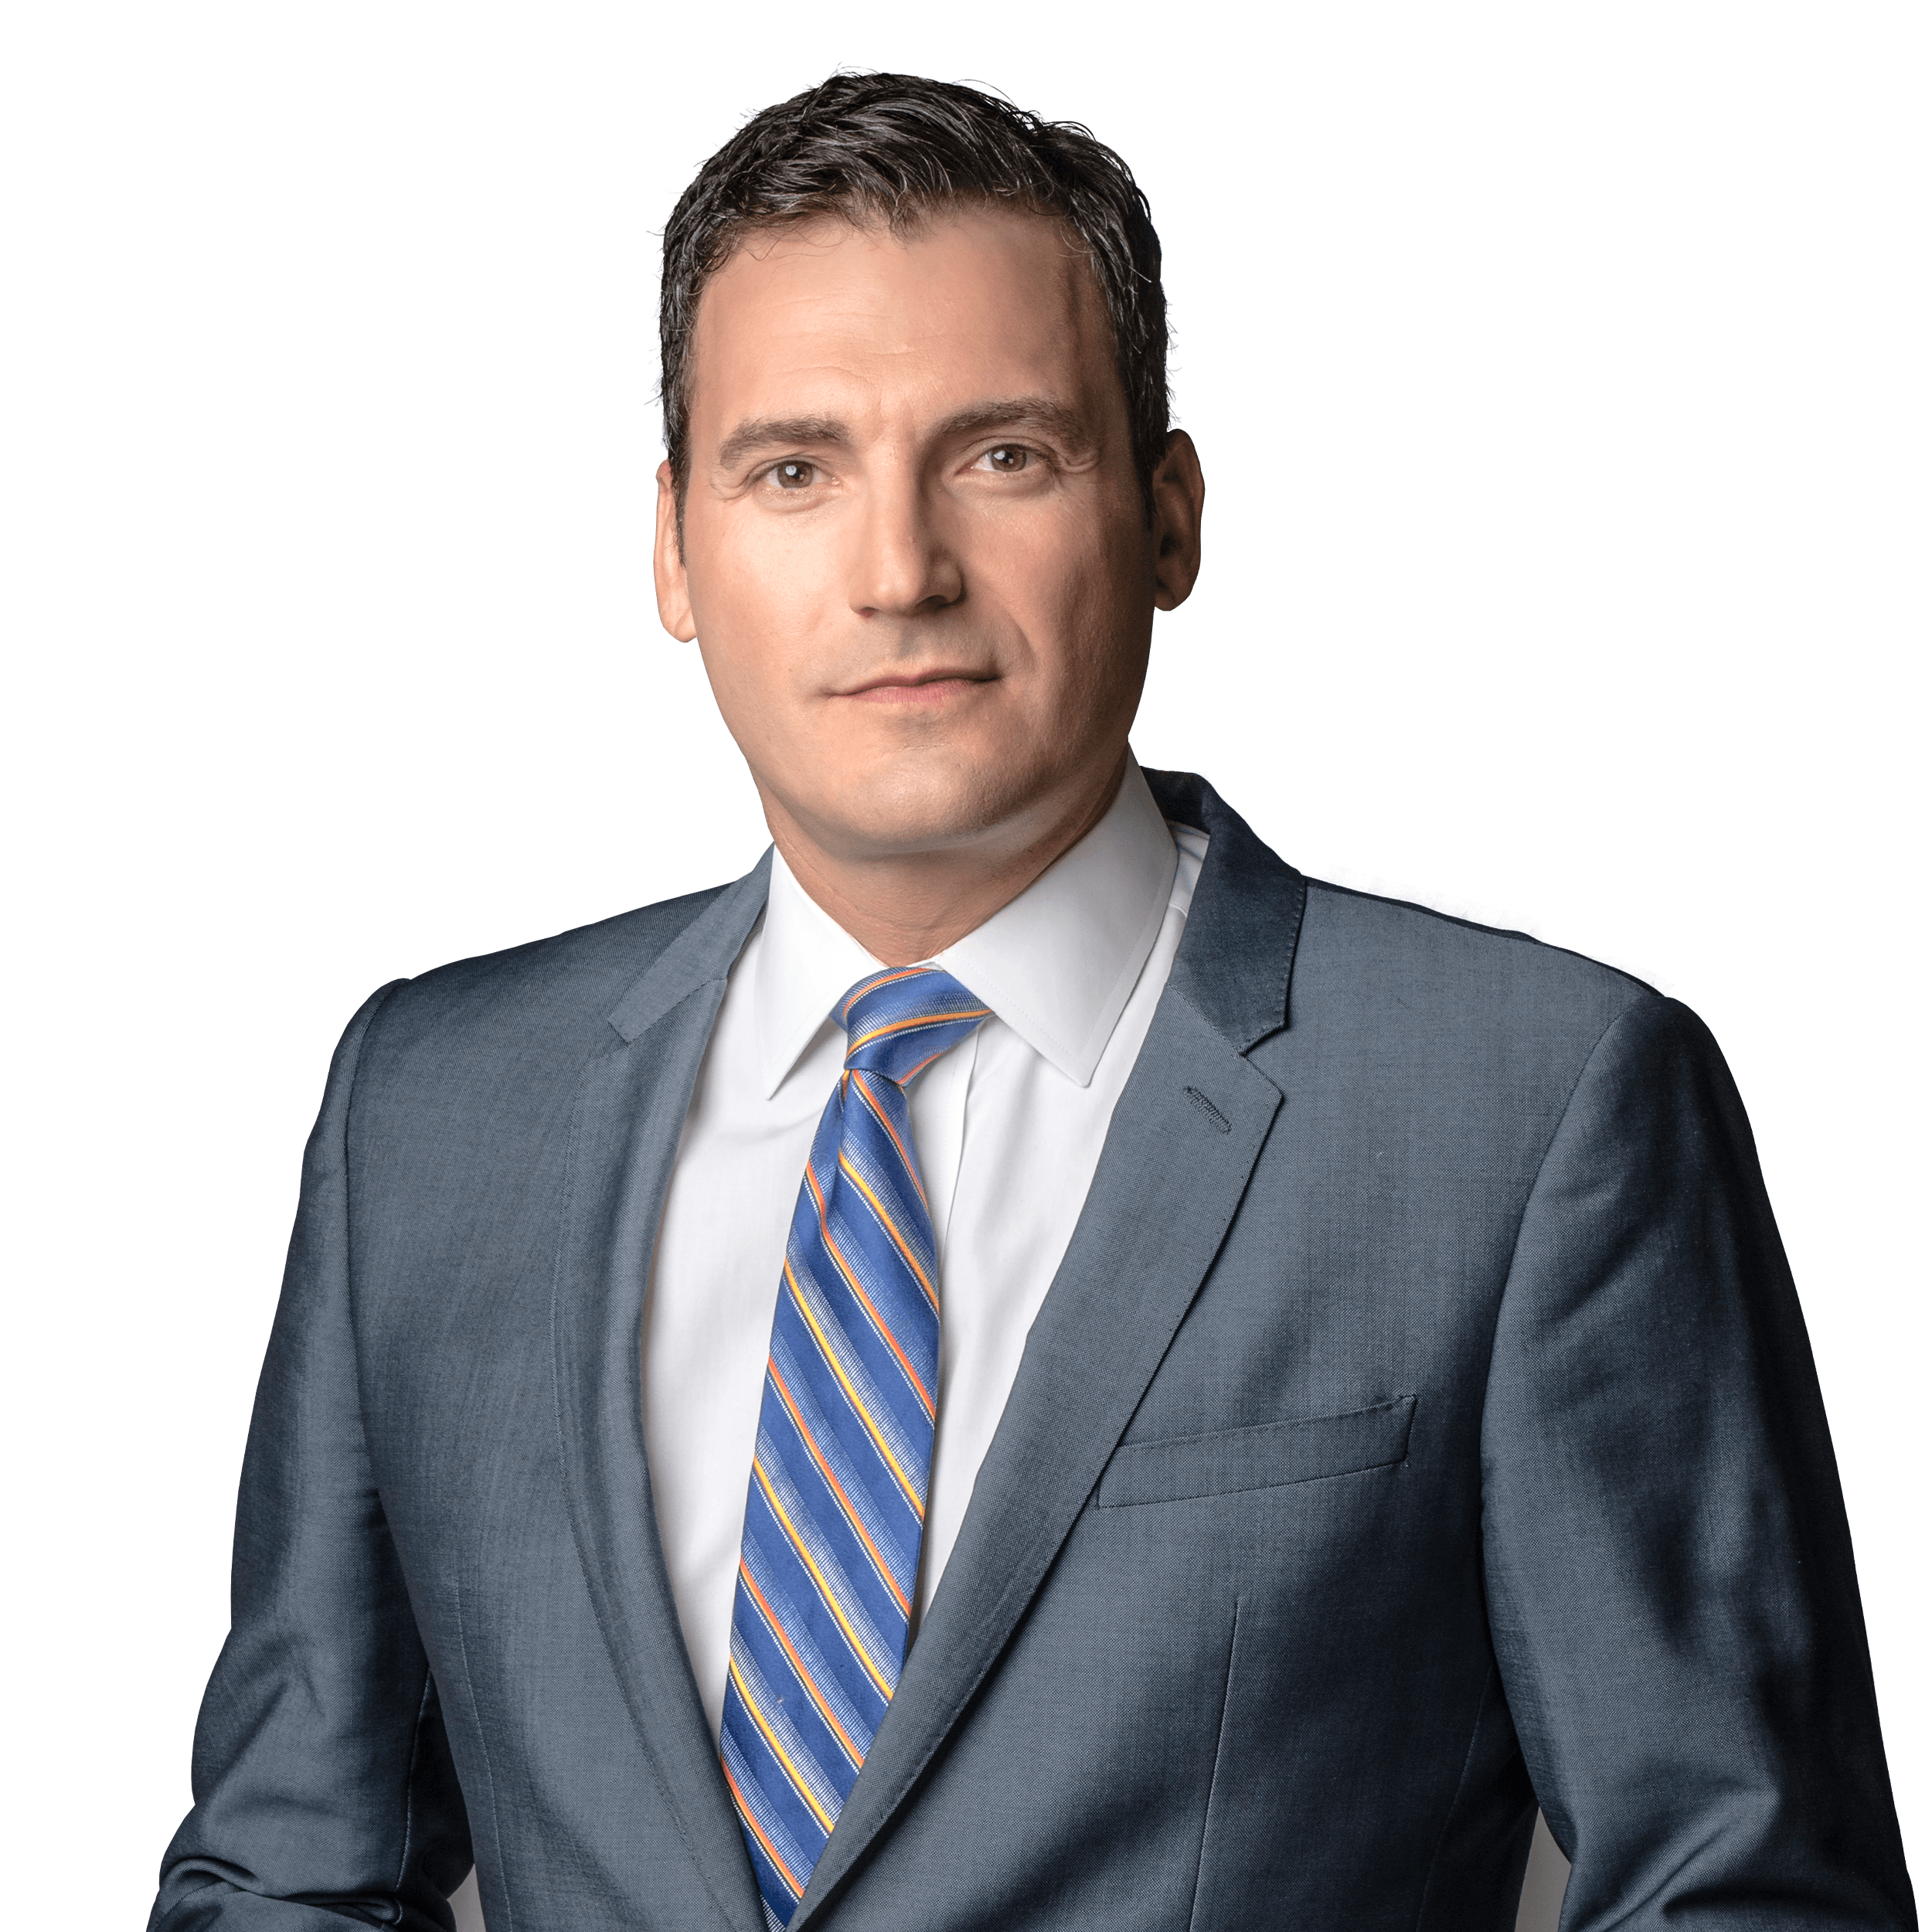 Hour 1 of The Evan Solomon Show for August 4th, 2020